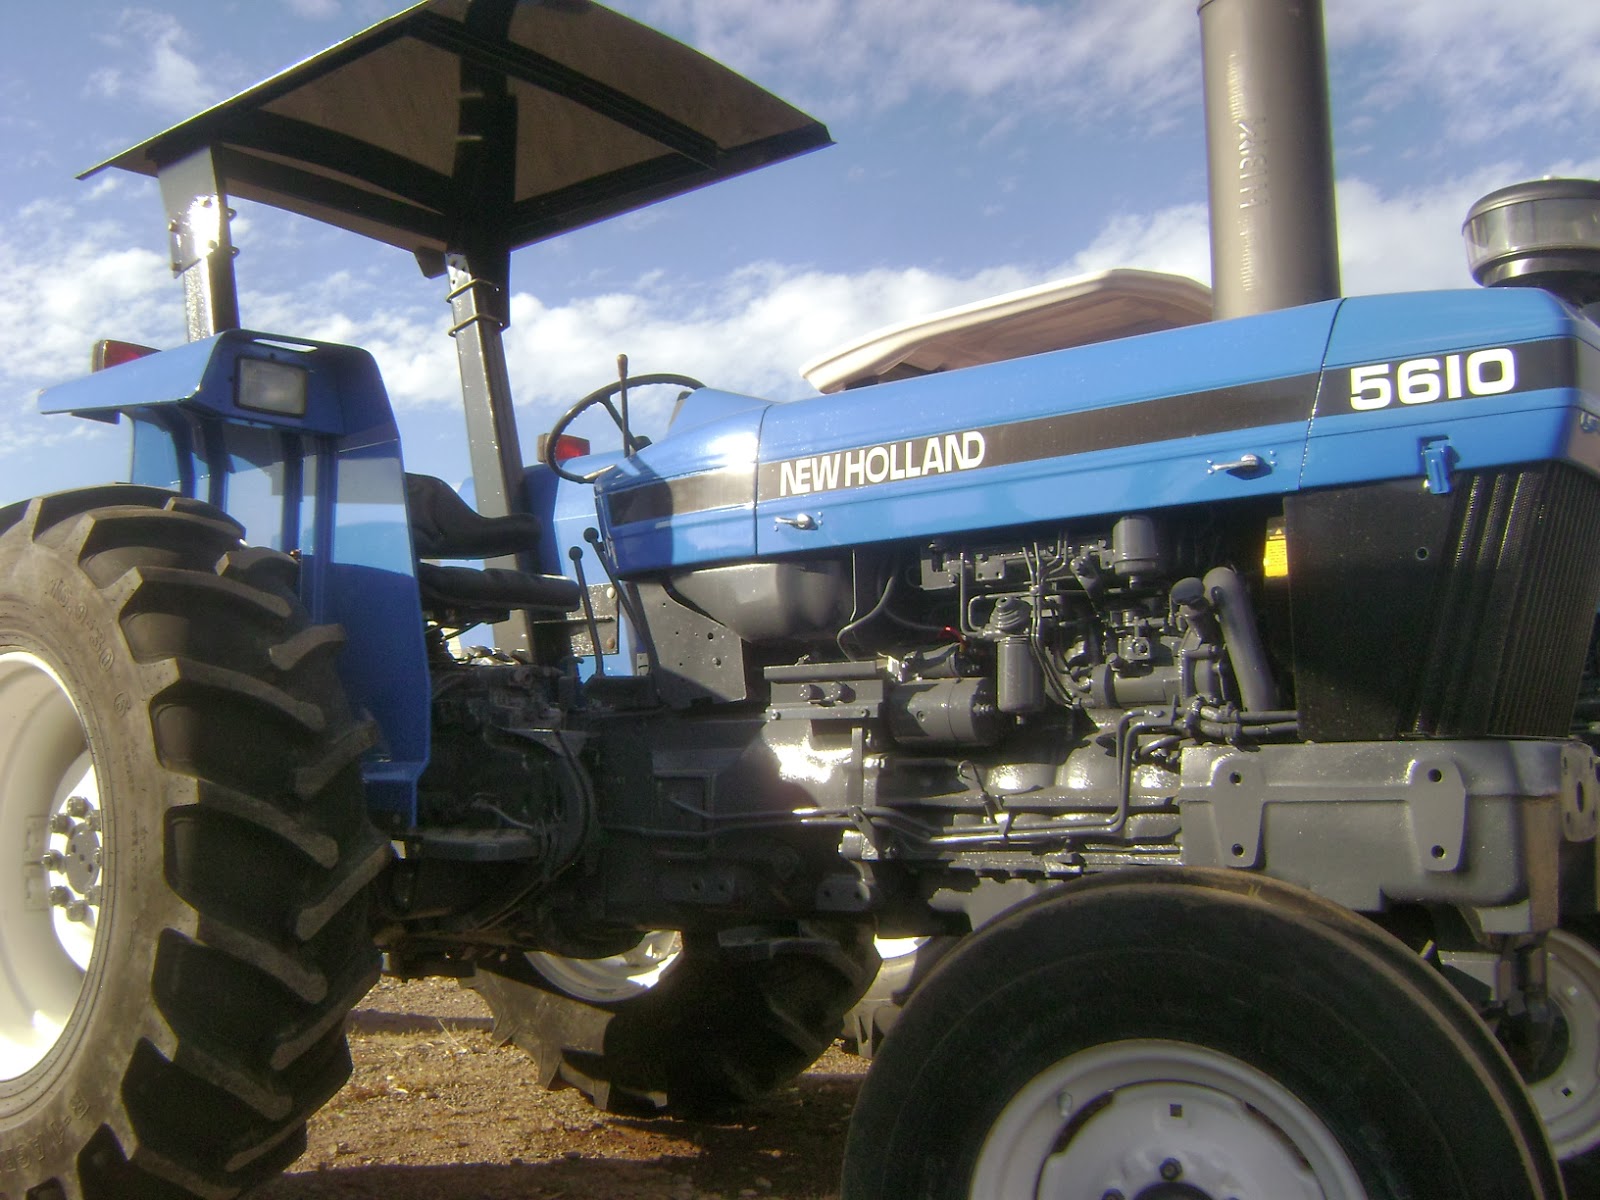 New holland 5610. Amazing pictures & video to New holland 5610. | Cars ...